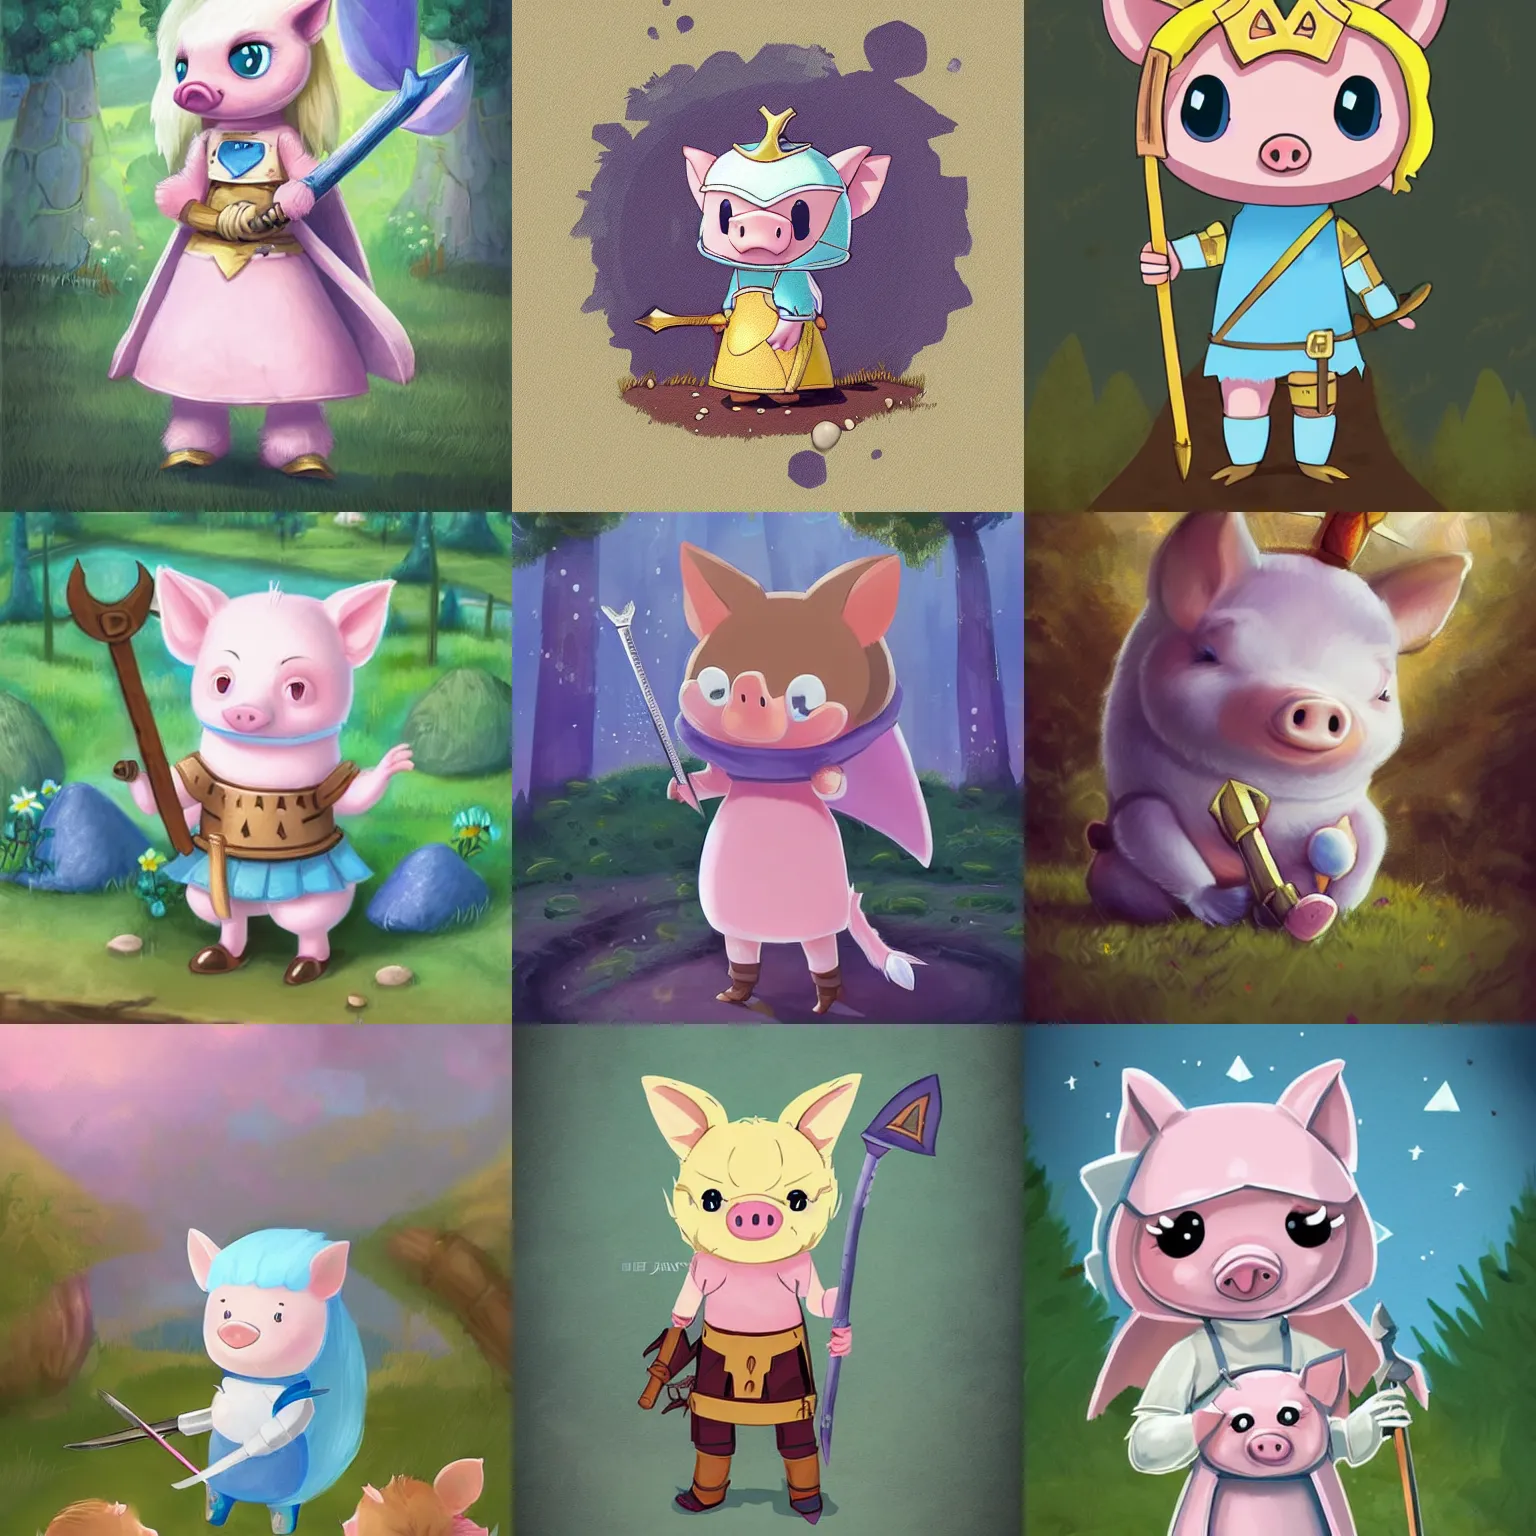 Prompt: very cute and adorable little piggy knight princess portrait, holding a sword, adorable blue eyes, piglet, fantasy forest landscape, lake, summer, pale blue outfit, cute forest creature, fluffy, pastel colors, Adventure Time, Dreamworks, Behance, Pokemon, Artstation, trending on artstation, peach and goma style, milk and mocha style, art of silverfox, Yee Chong Silverfox, Sydney Hanson, Sofya Emelenko, Elina Karimova